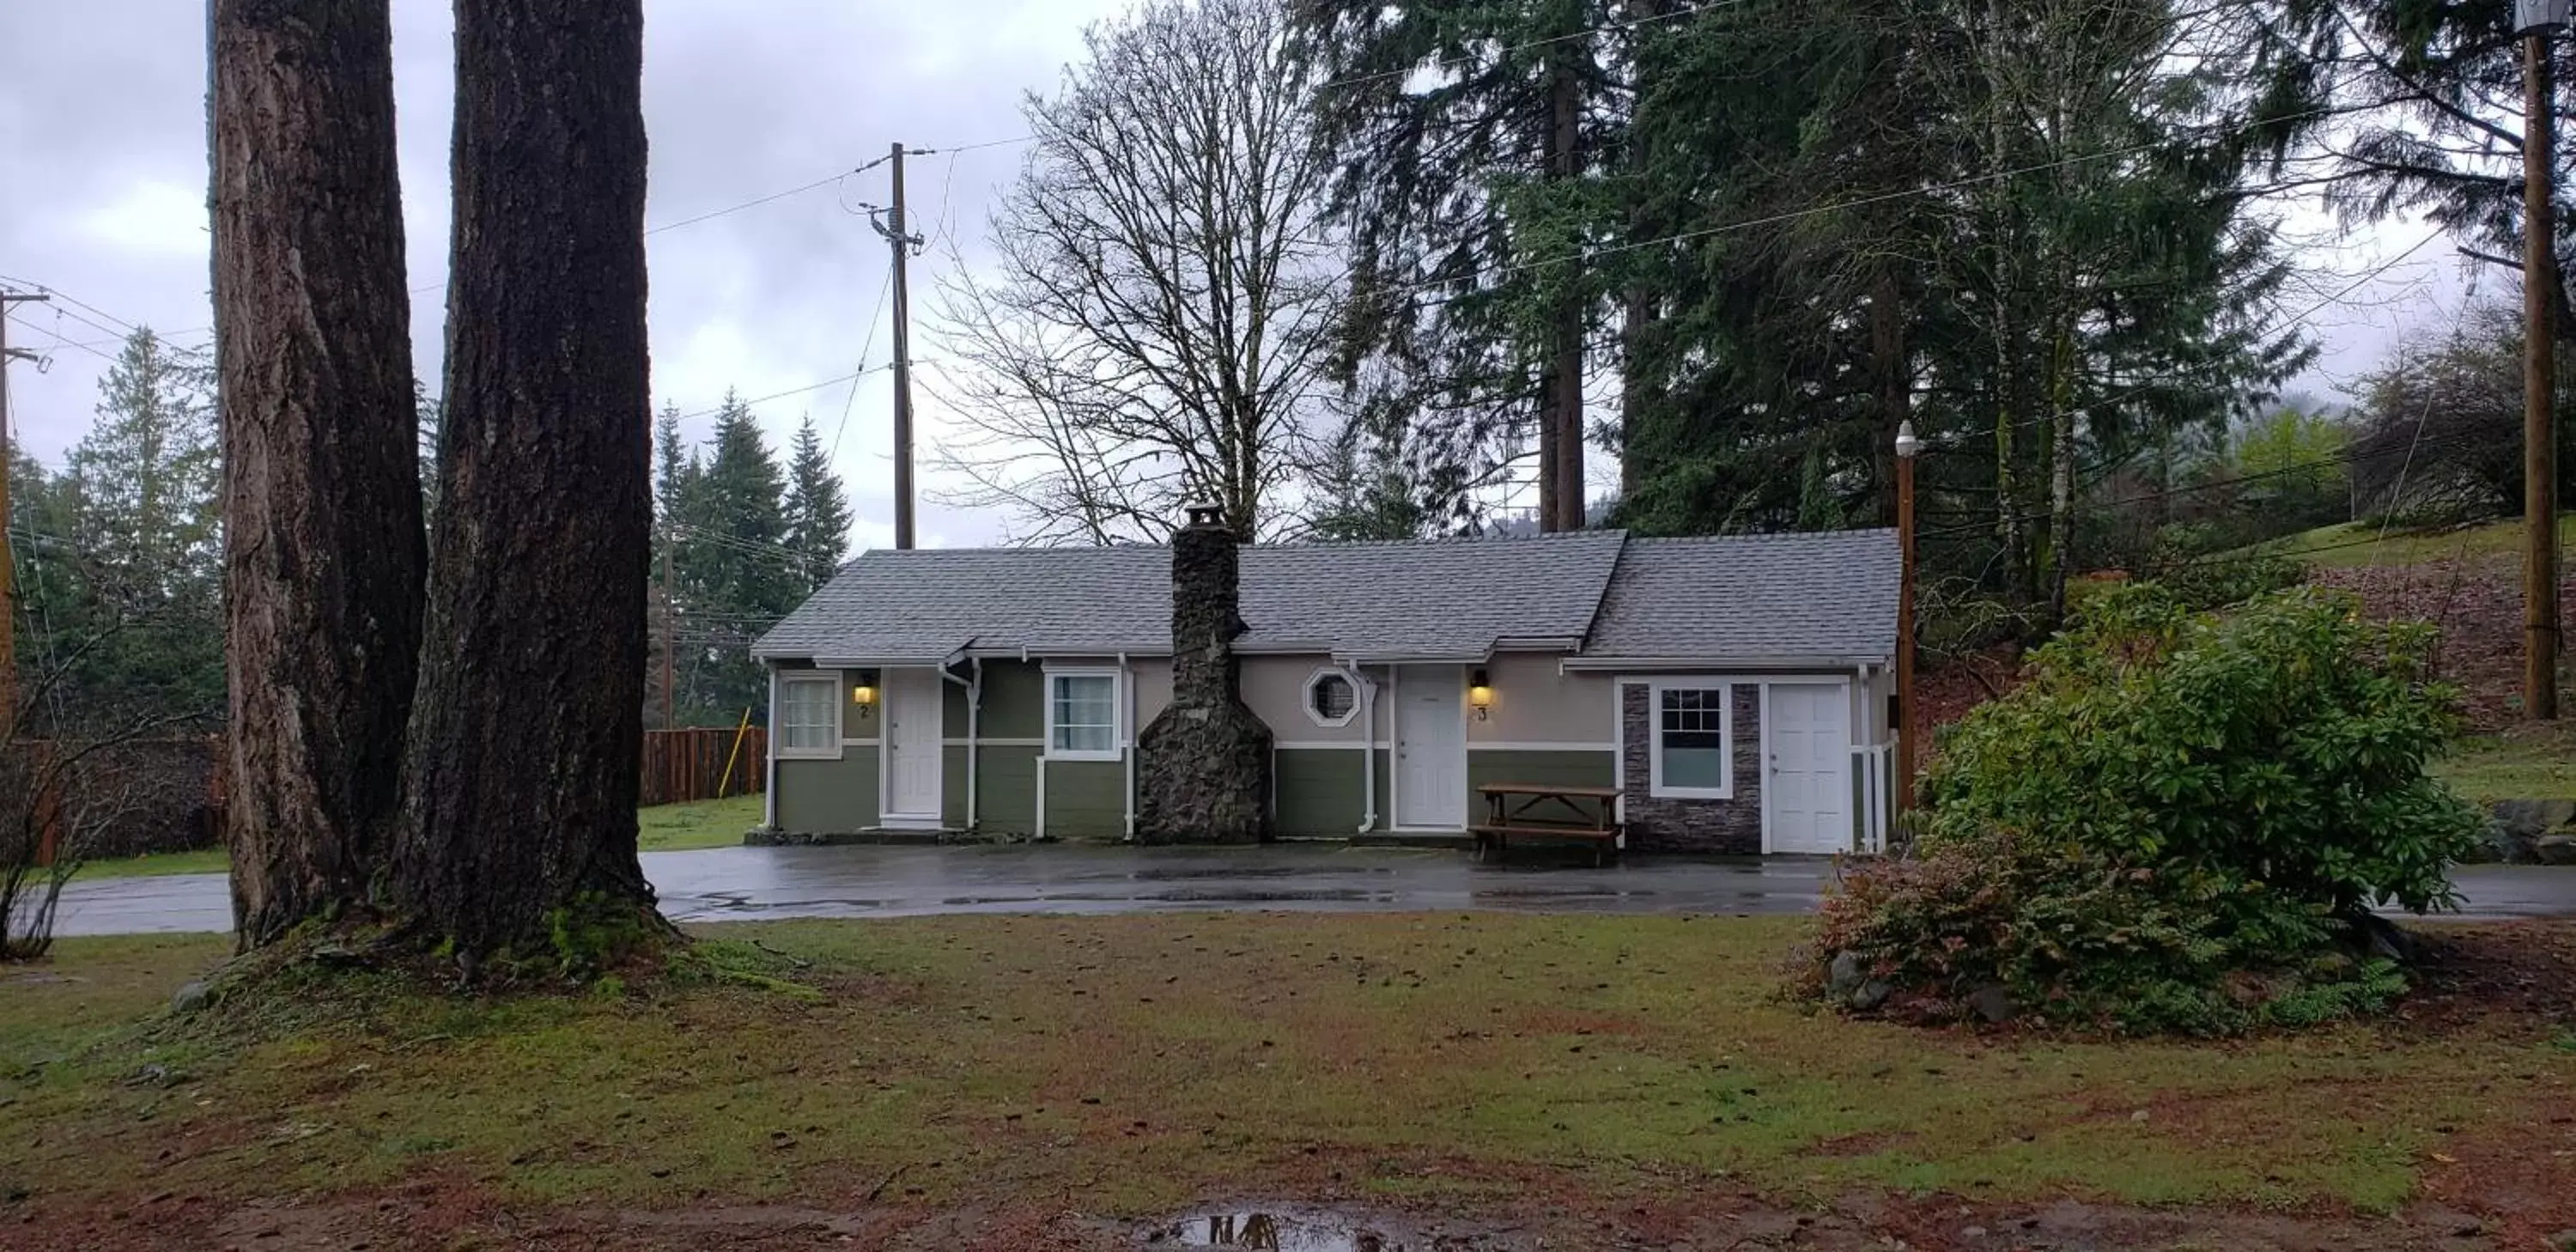 Property Building in Malahat Bungalows Motel